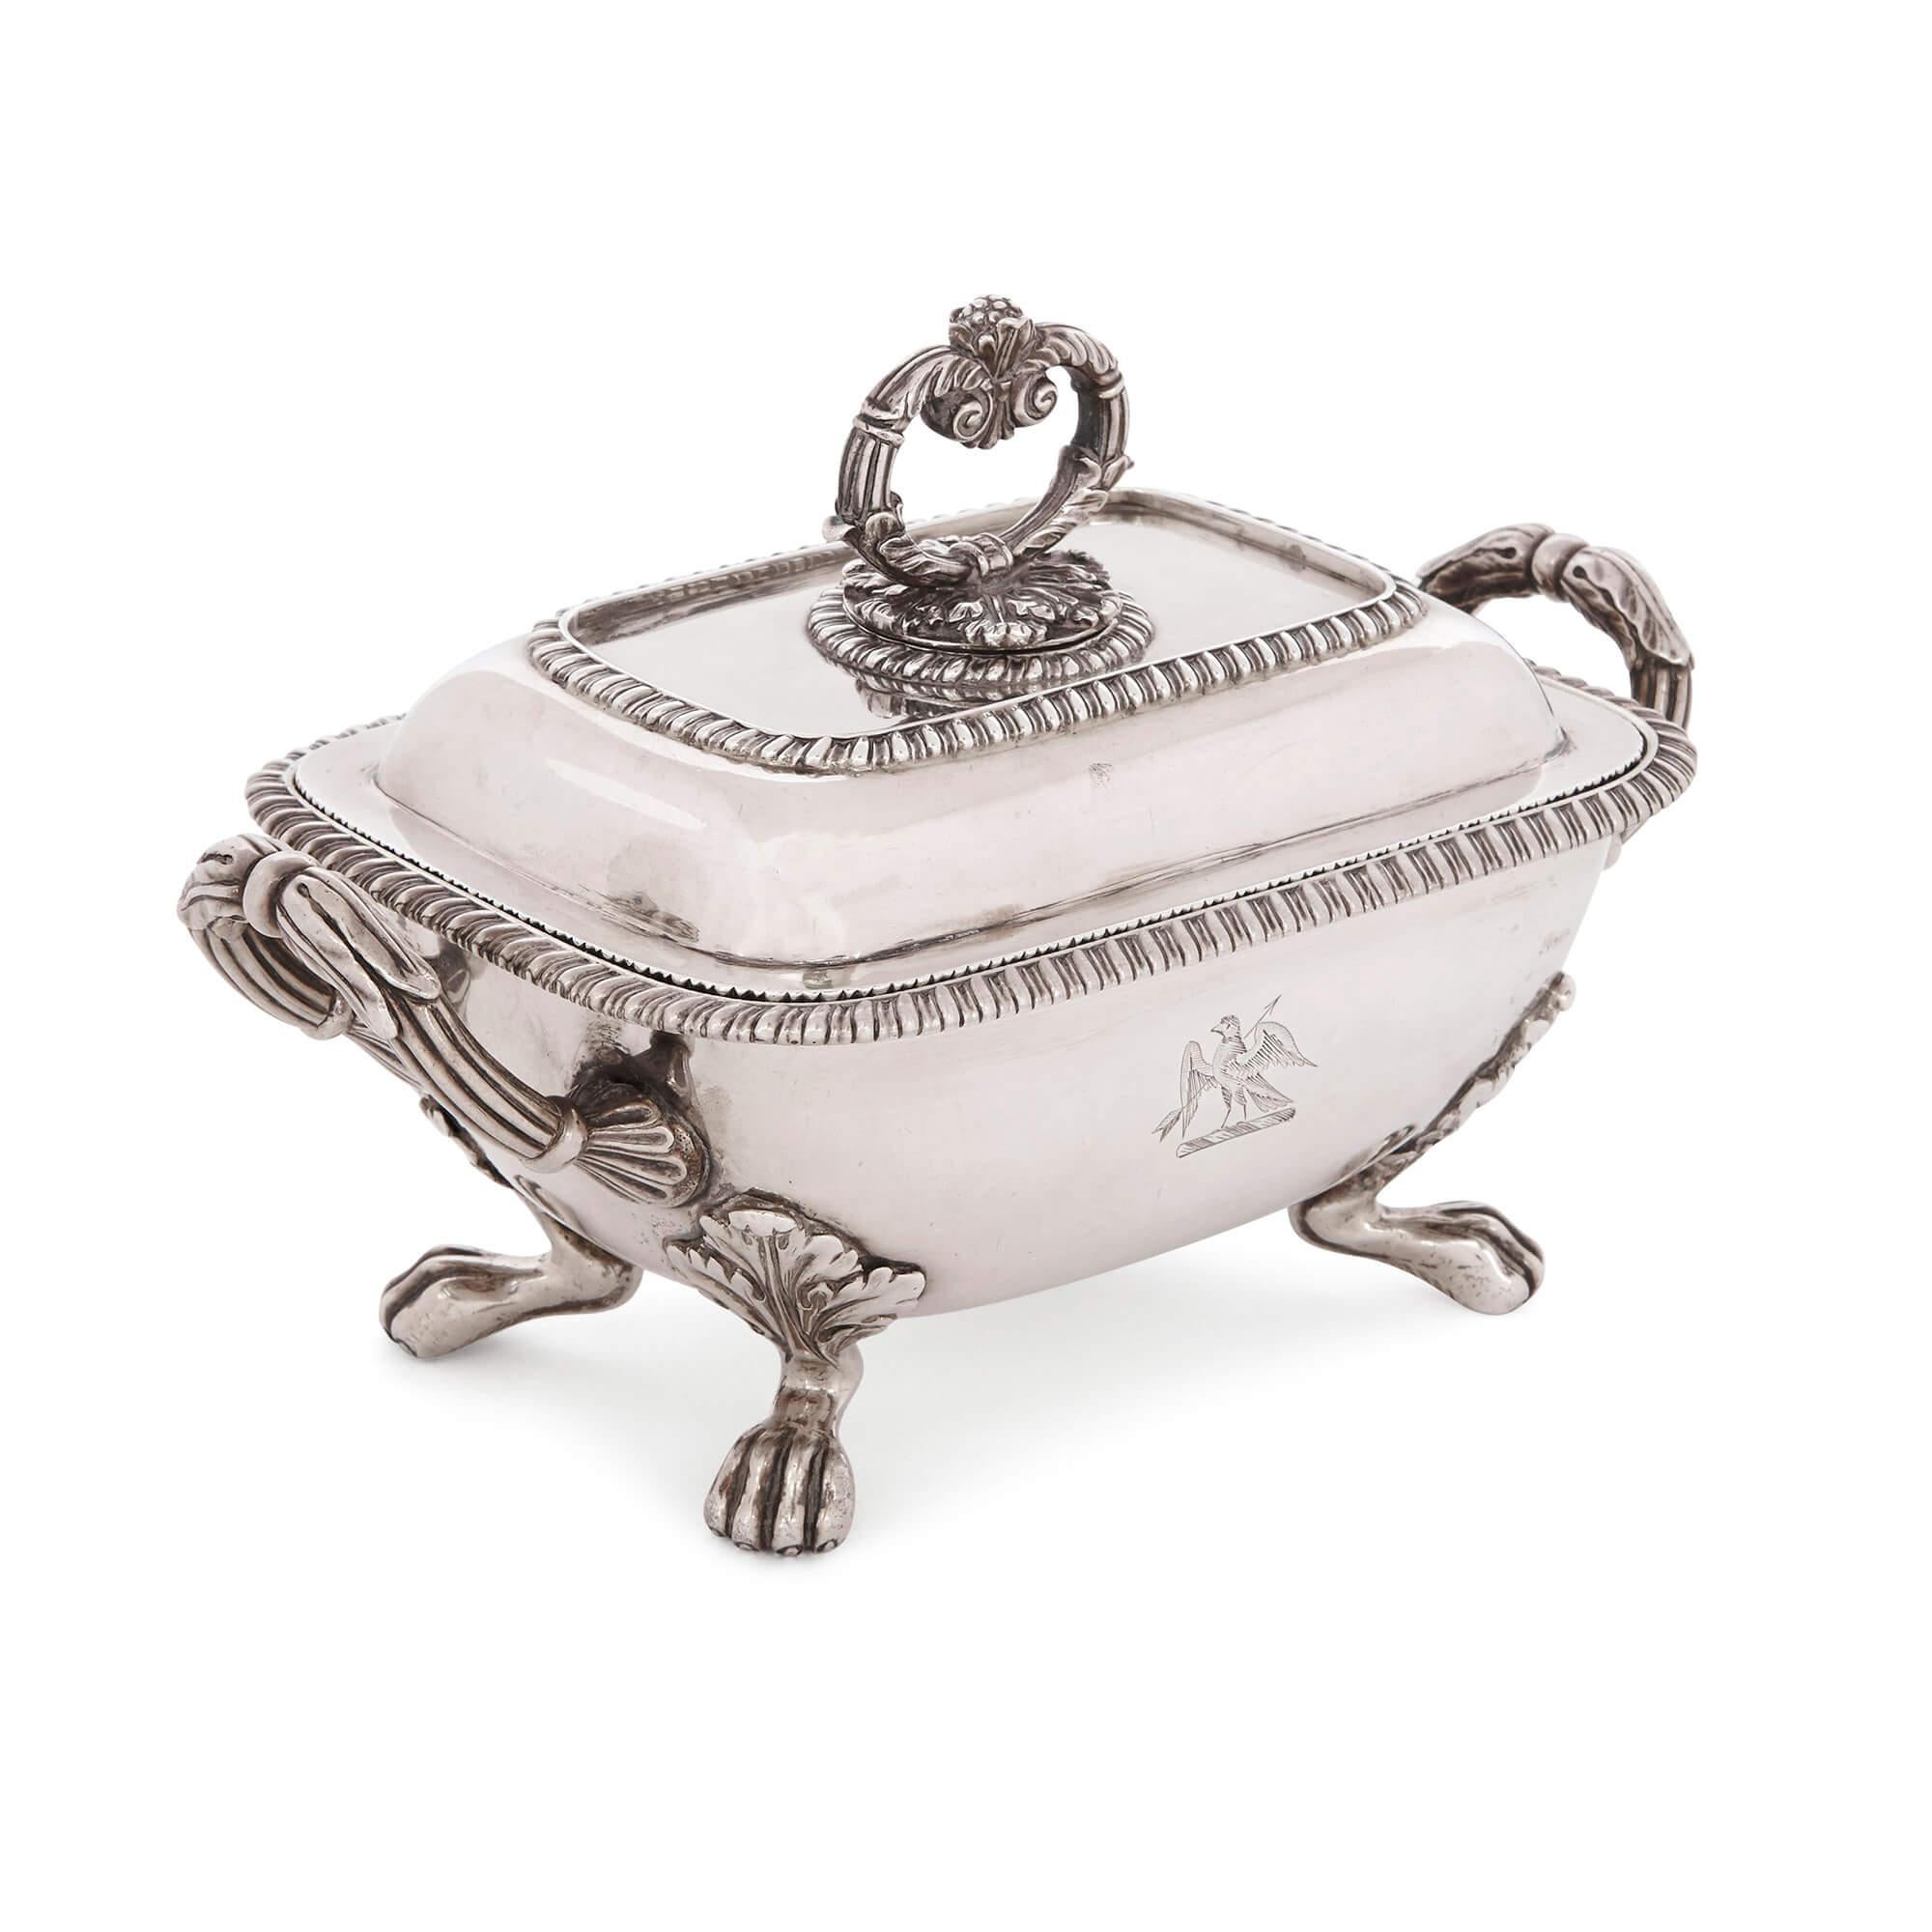 Rebecca Emes is one of the most prominent English silversmiths of the late 18th and early 19th century. Together with her business partner, Edward Barnard I, Emes is responsible for the beautiful design and exceptionally fine work of these four